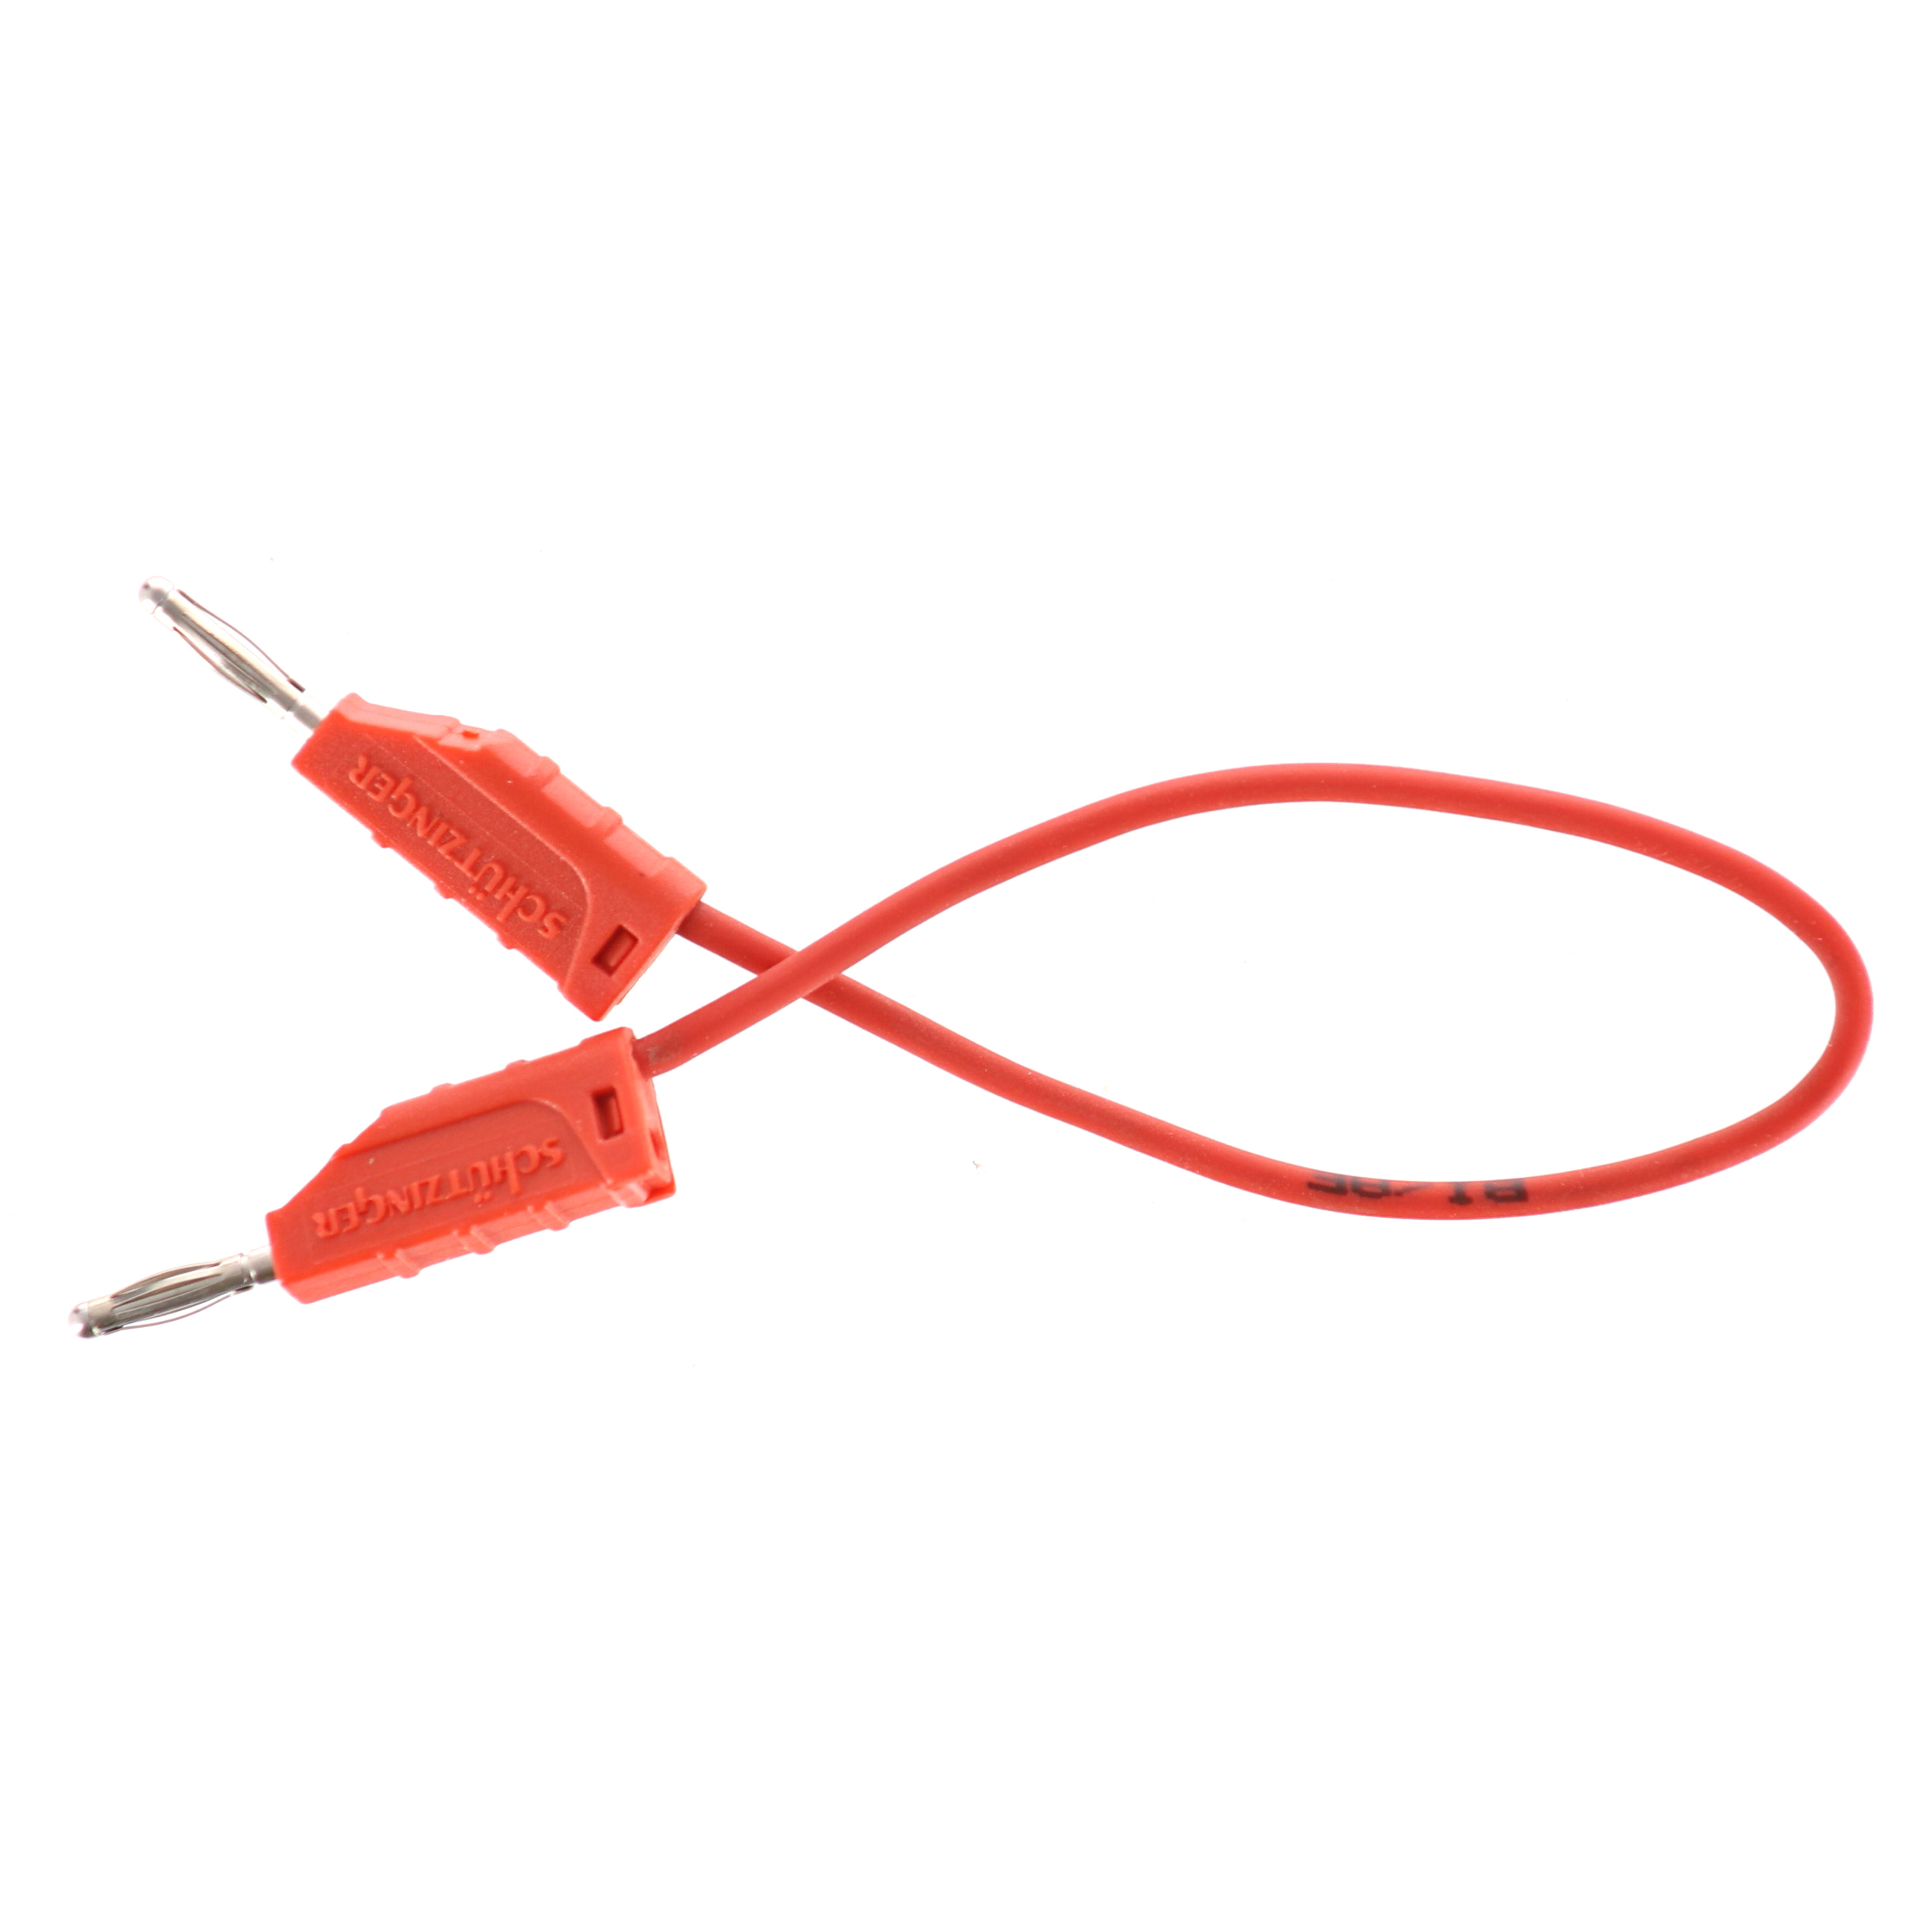 2mm Stackable Lead (15cm Long) - Red